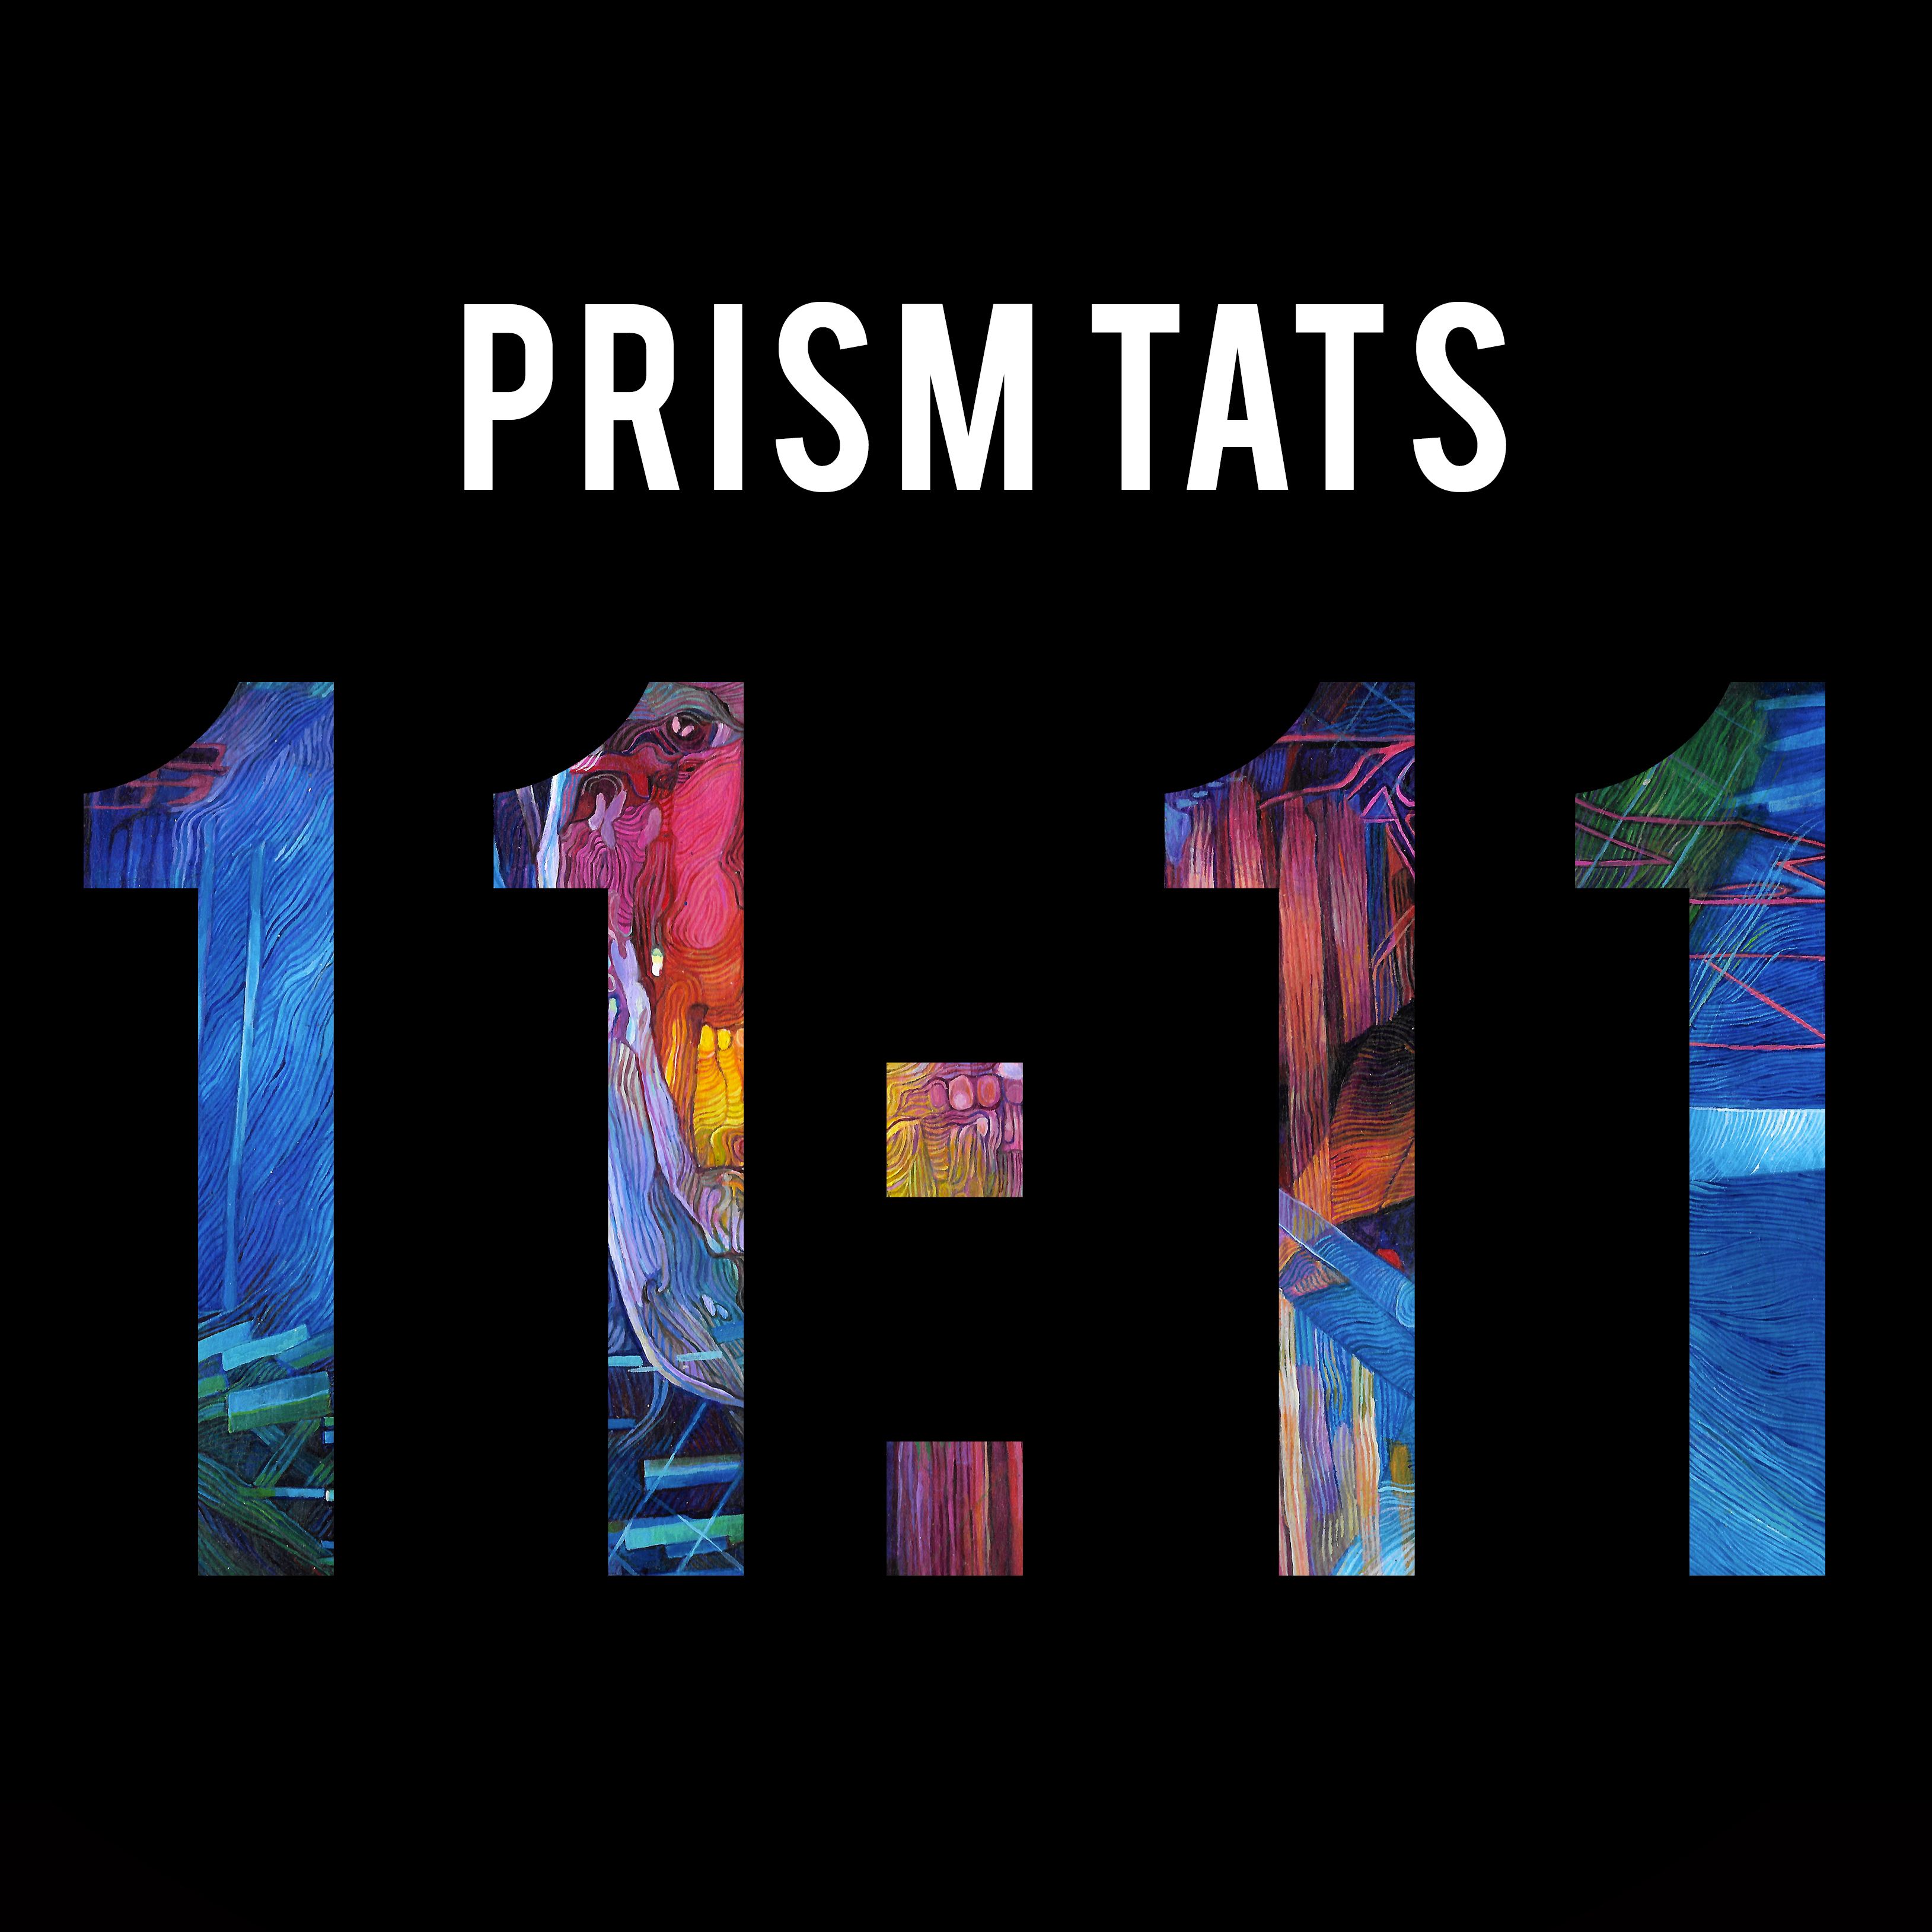 Prism Tats – “Used To Be Cool”